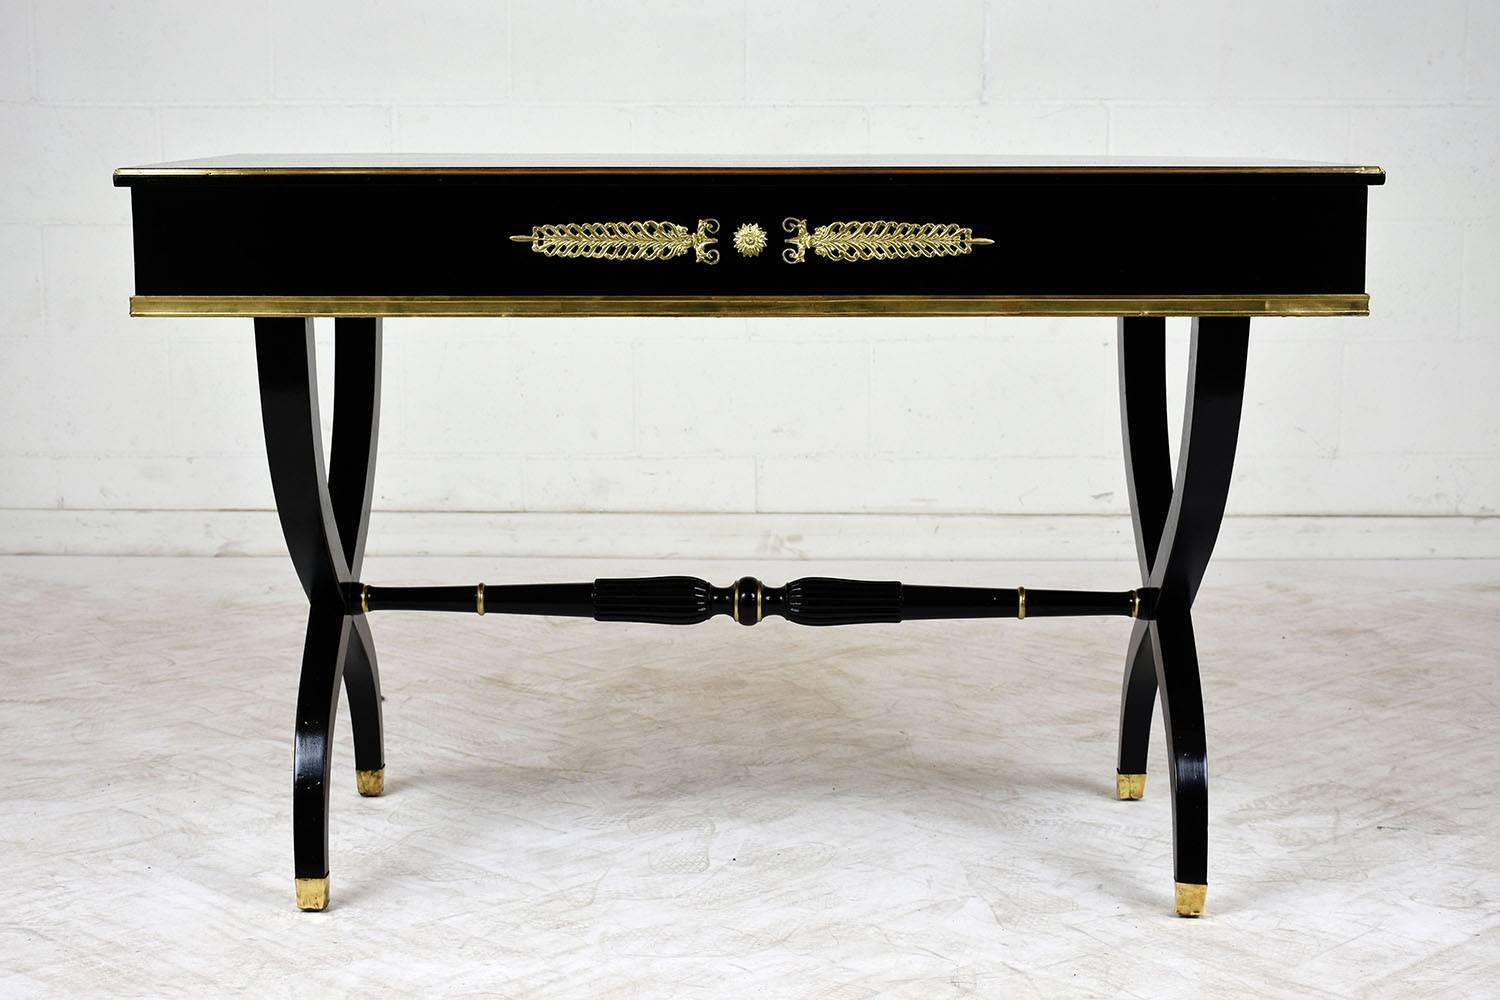 This 1950s Empire style writing desk is made of mahogany wood stained an ebonized color with a lacquered finish. There is a single drawer with brass ormolu accents that compliment the brass moulding on the edges of the desk. The stretched X-shaped